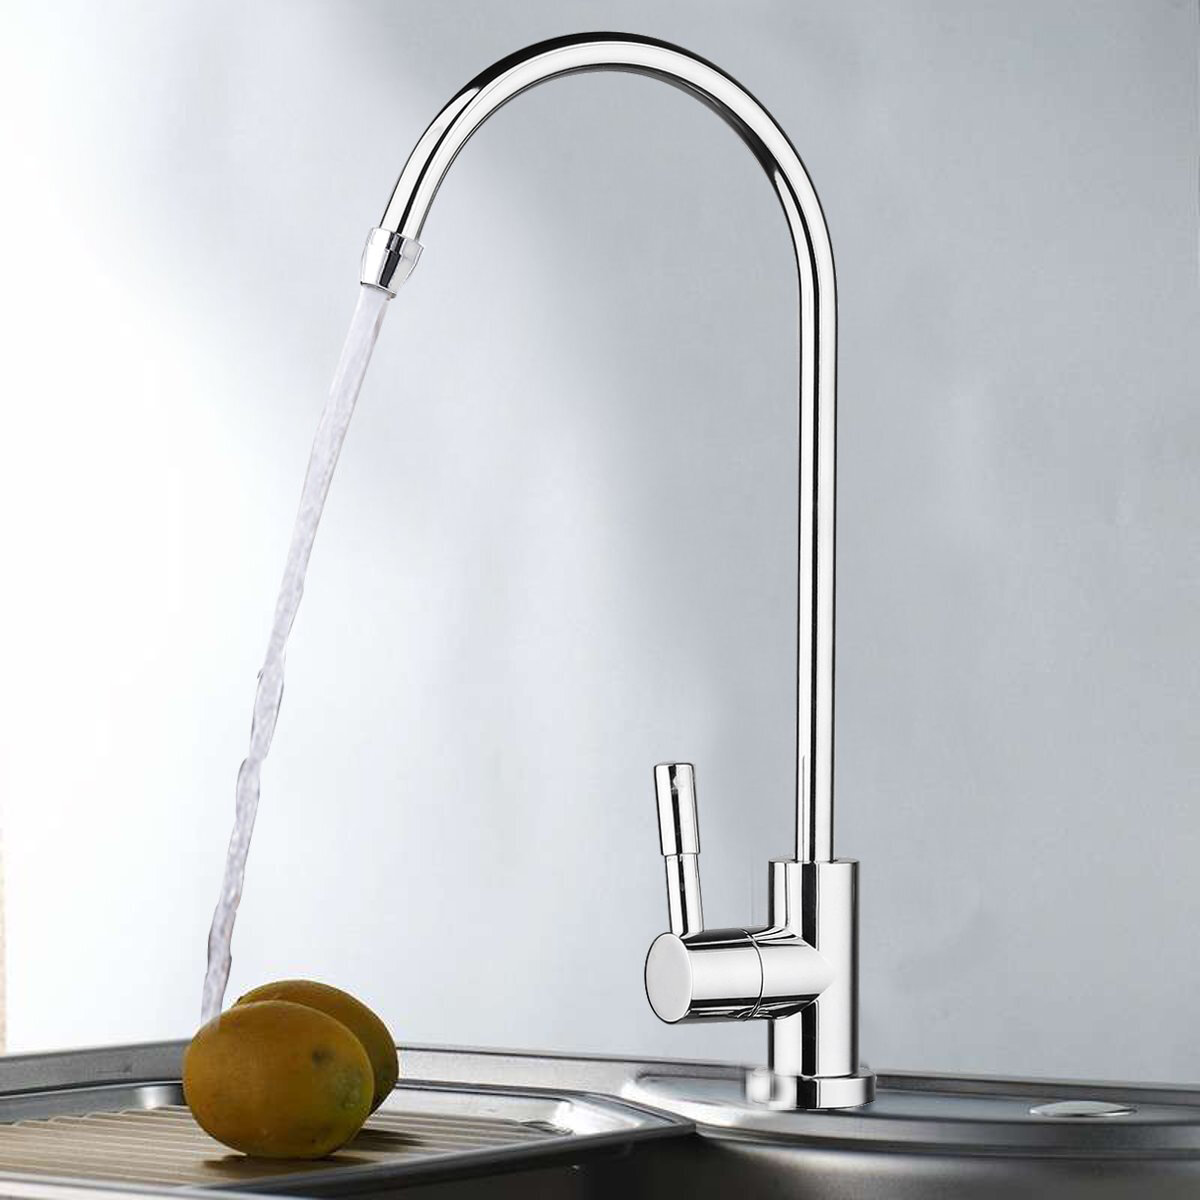 1 4 Inch Chrome Drinking Ro Water Filter Faucet Finish Reverse Osmosis Sink Kitchen